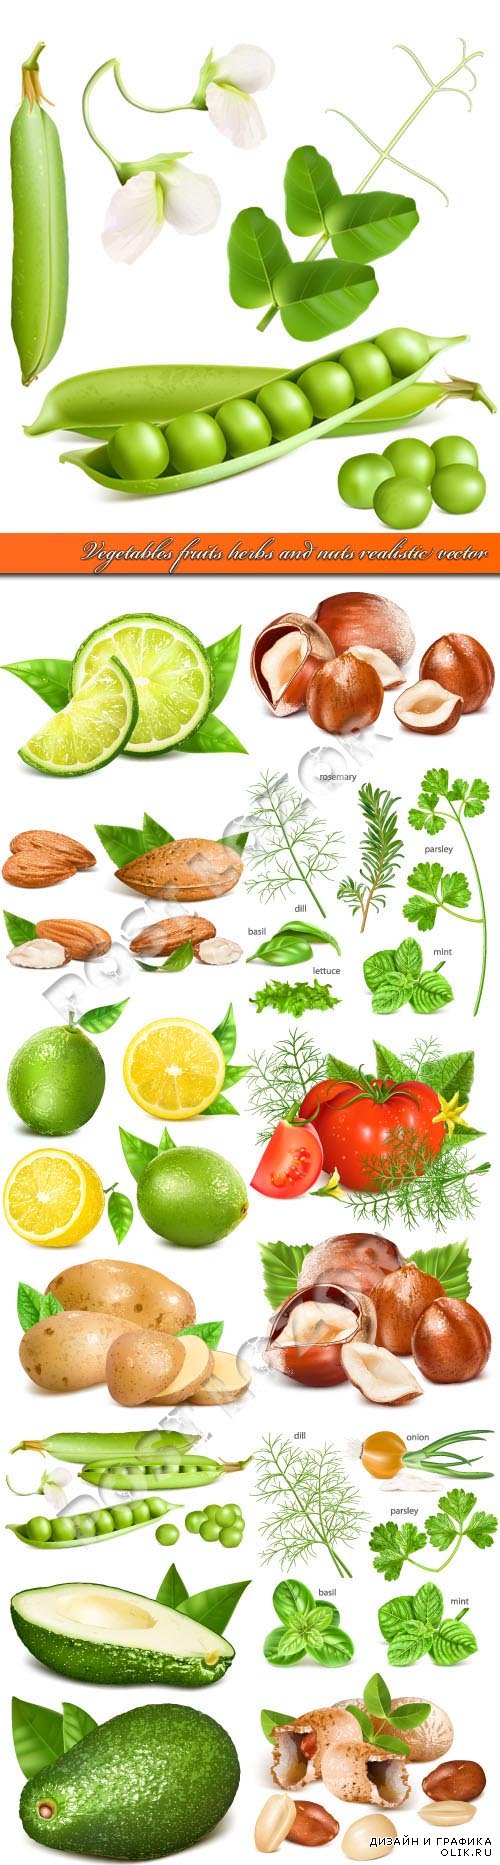 Vegetables fruits herbs and nuts realistic vector